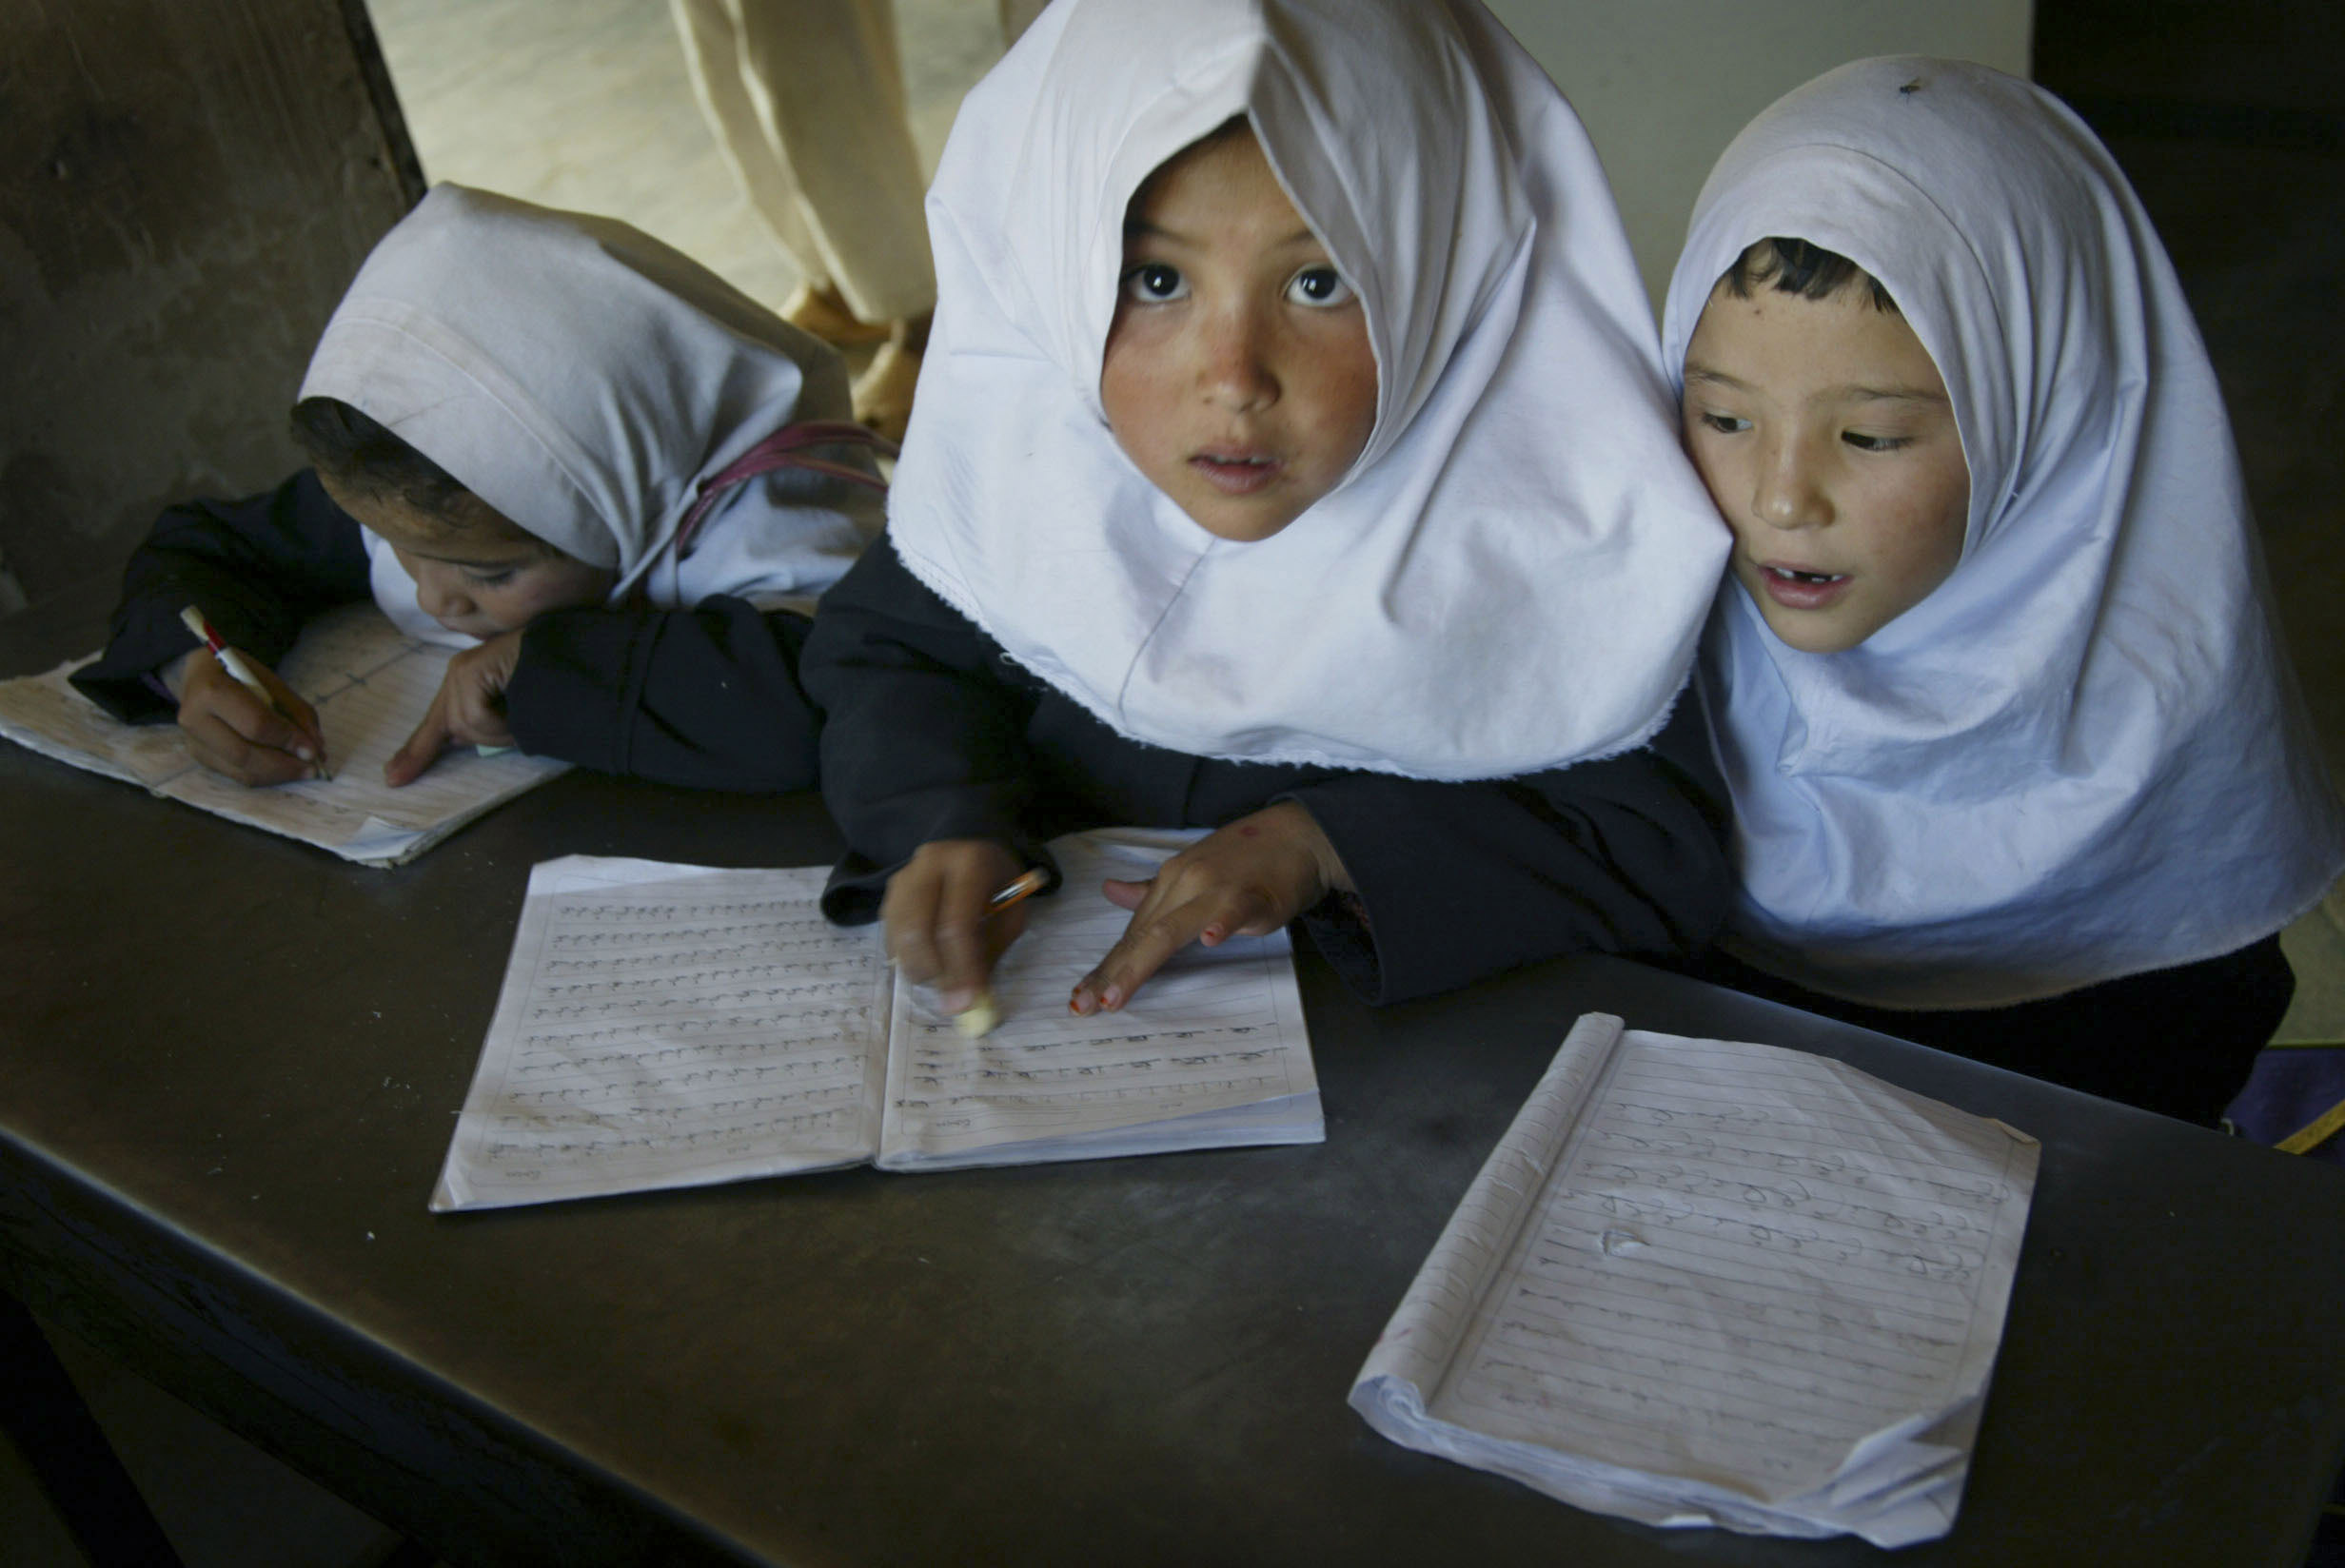 Solutions-oriented news outlets have covered the Afghan Institute of Learning’s success in educating females across Afghanistan